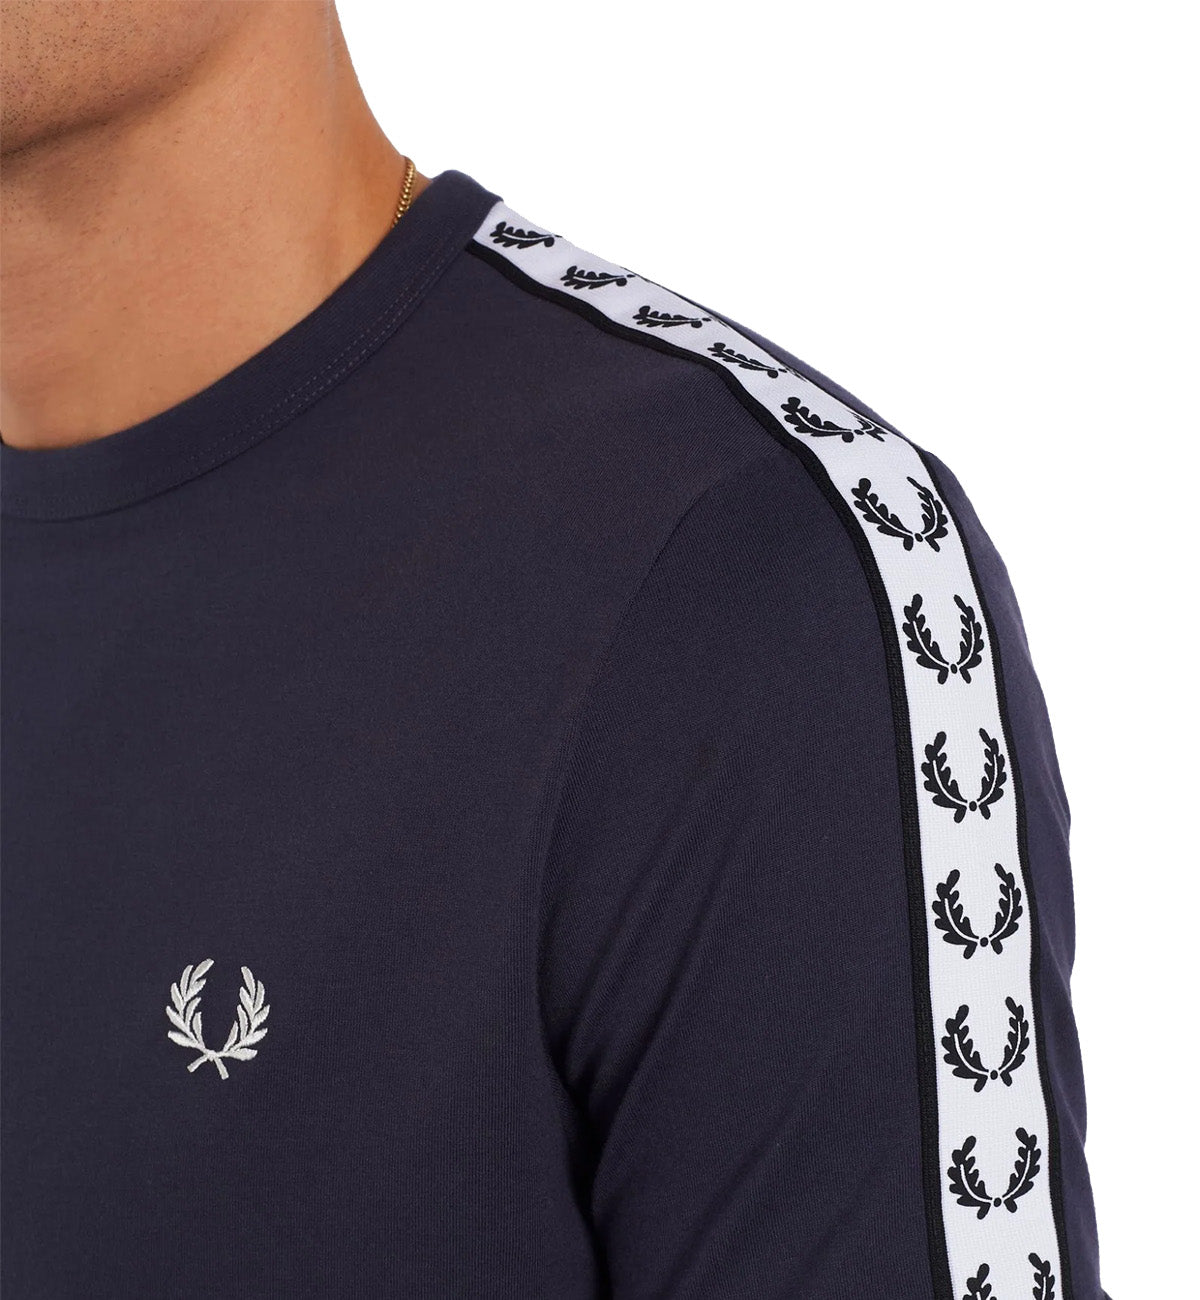 Fred Perry Taped Ringer Tee - Dark Graphite